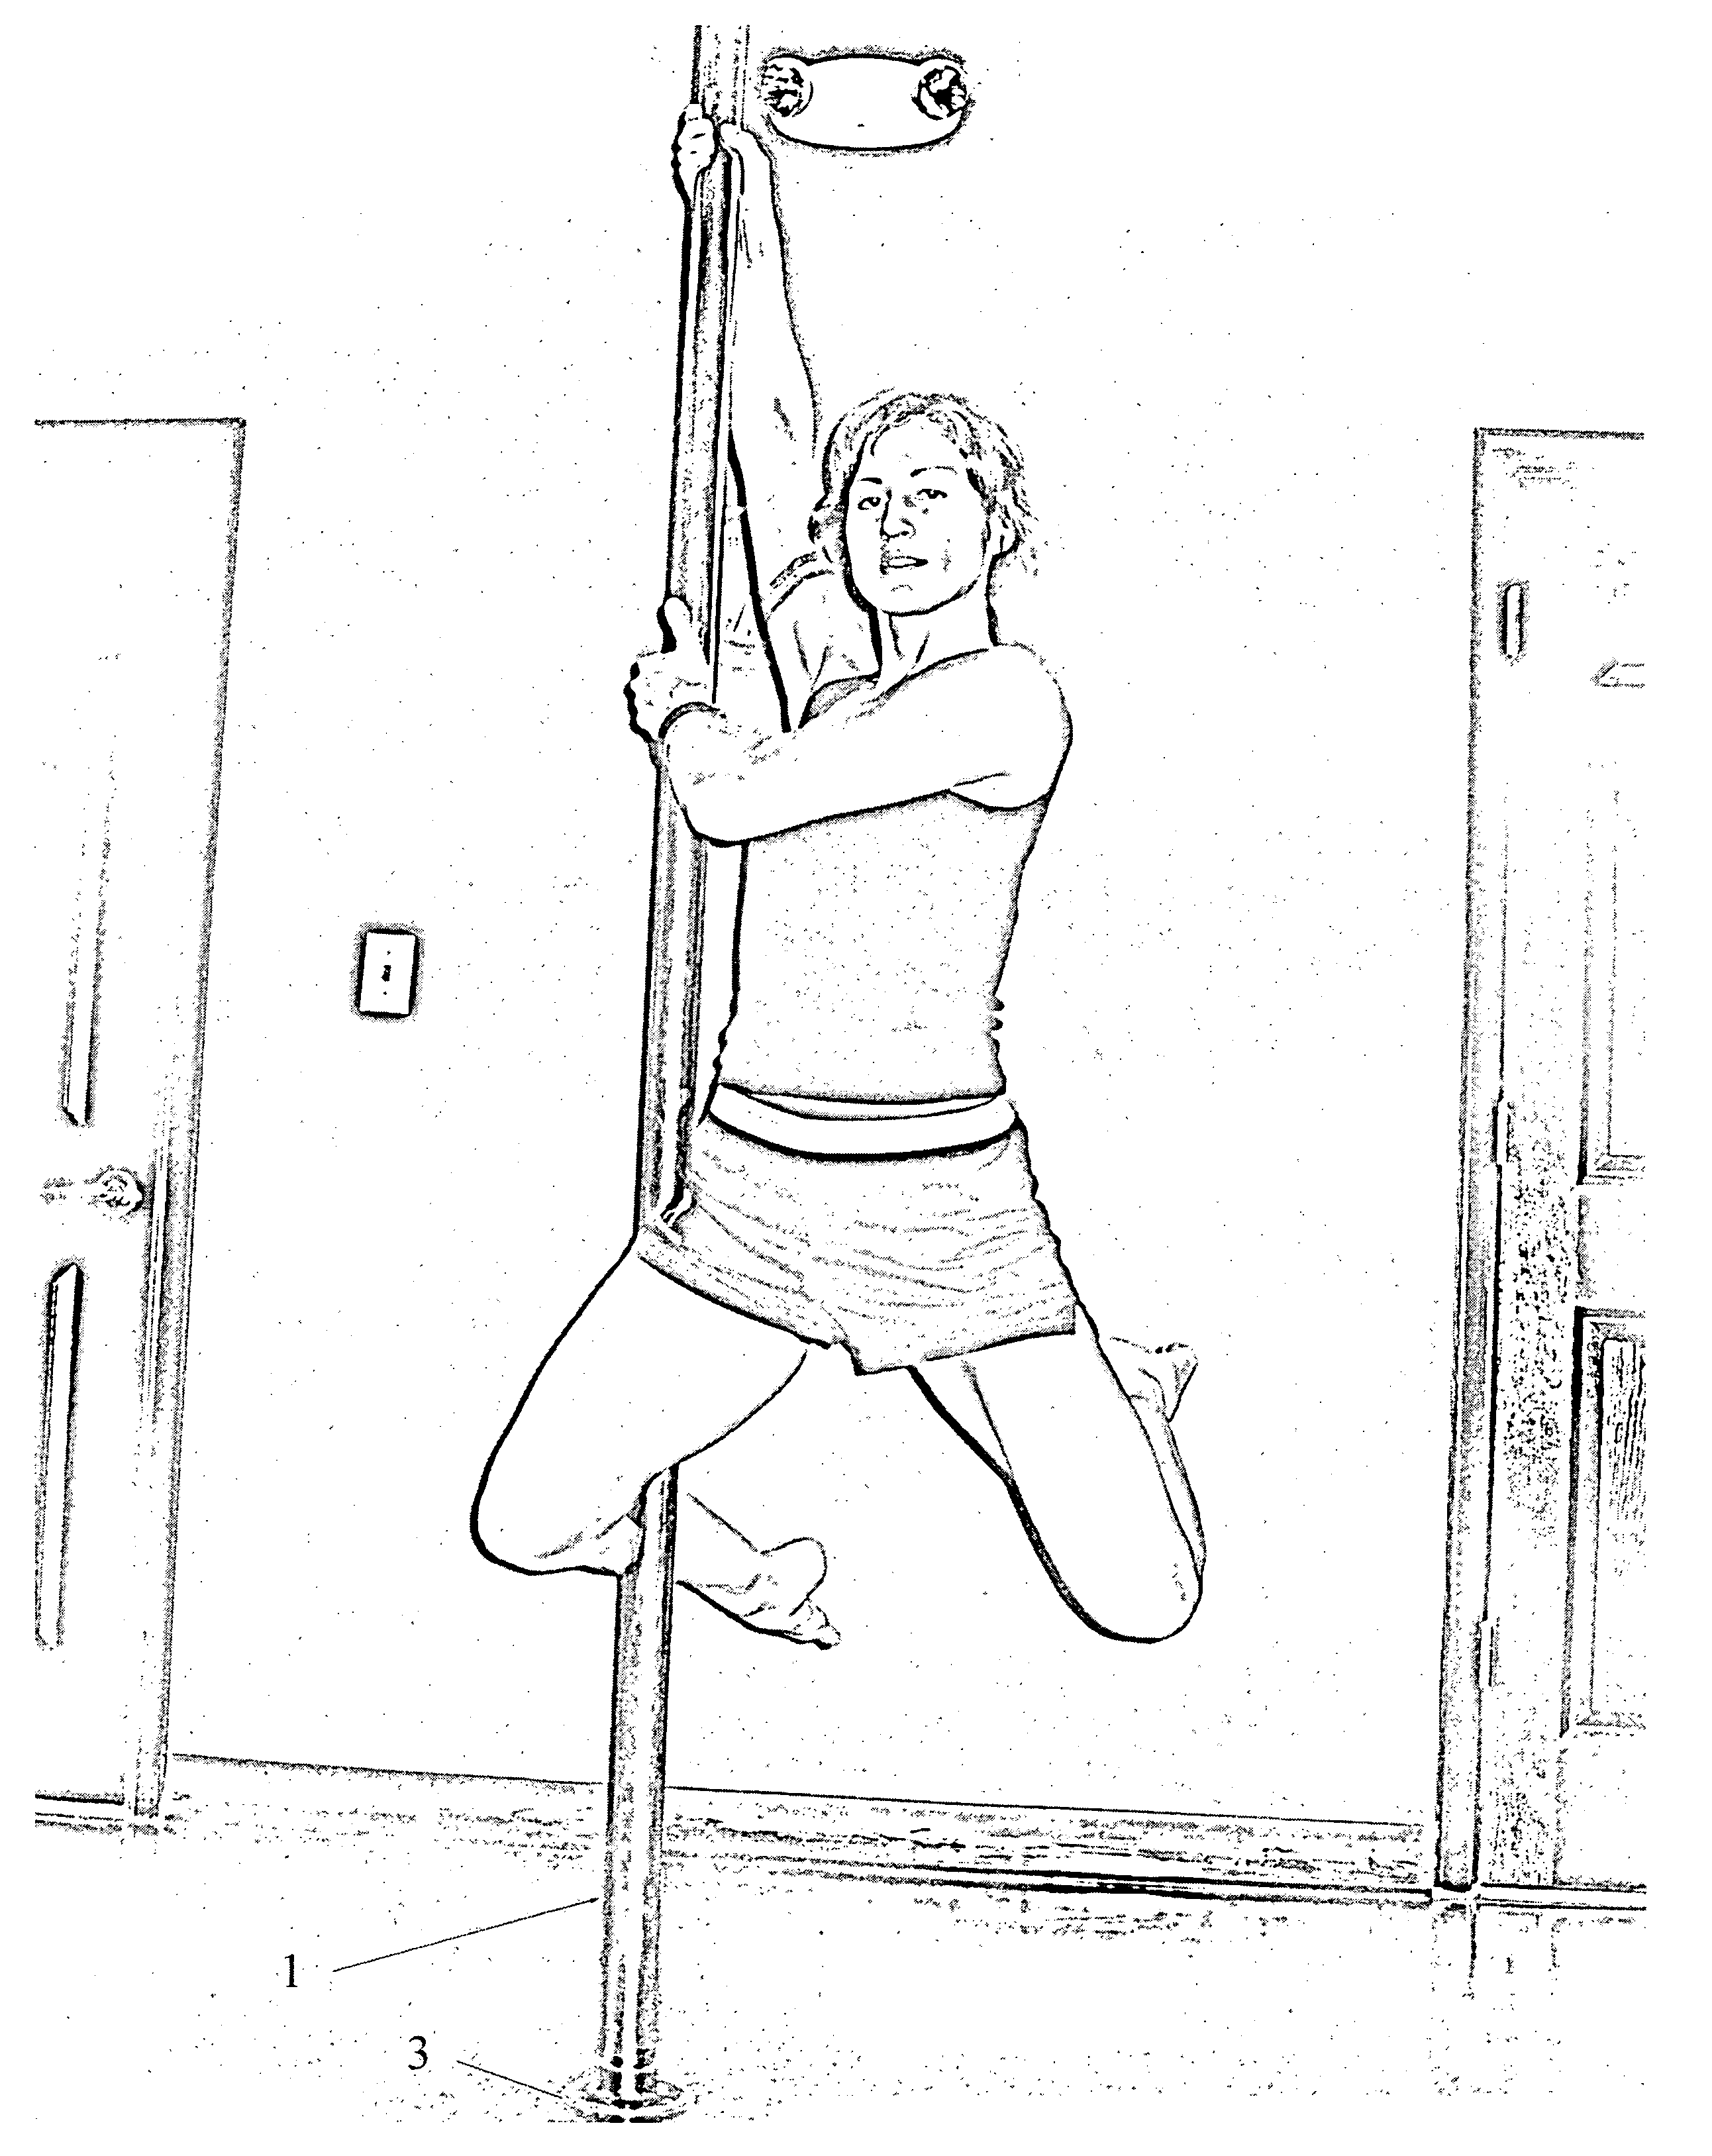 Portable exercise pole and method of use